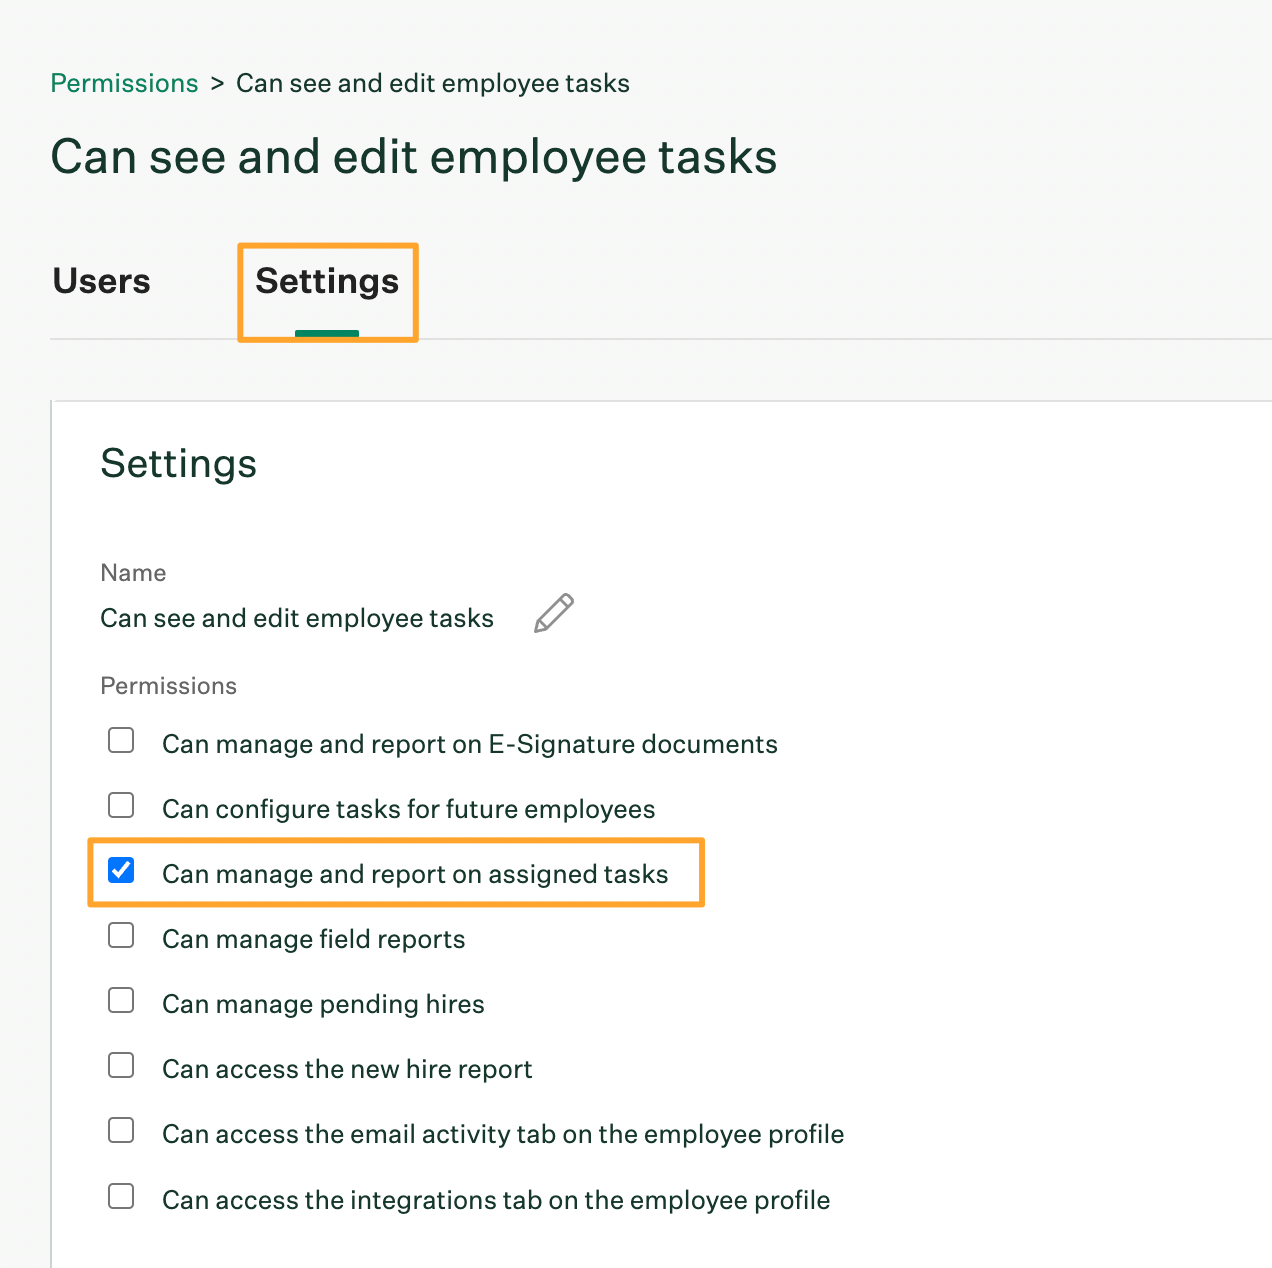 Can manage and report on assigned tasks permission enabled in custom access role